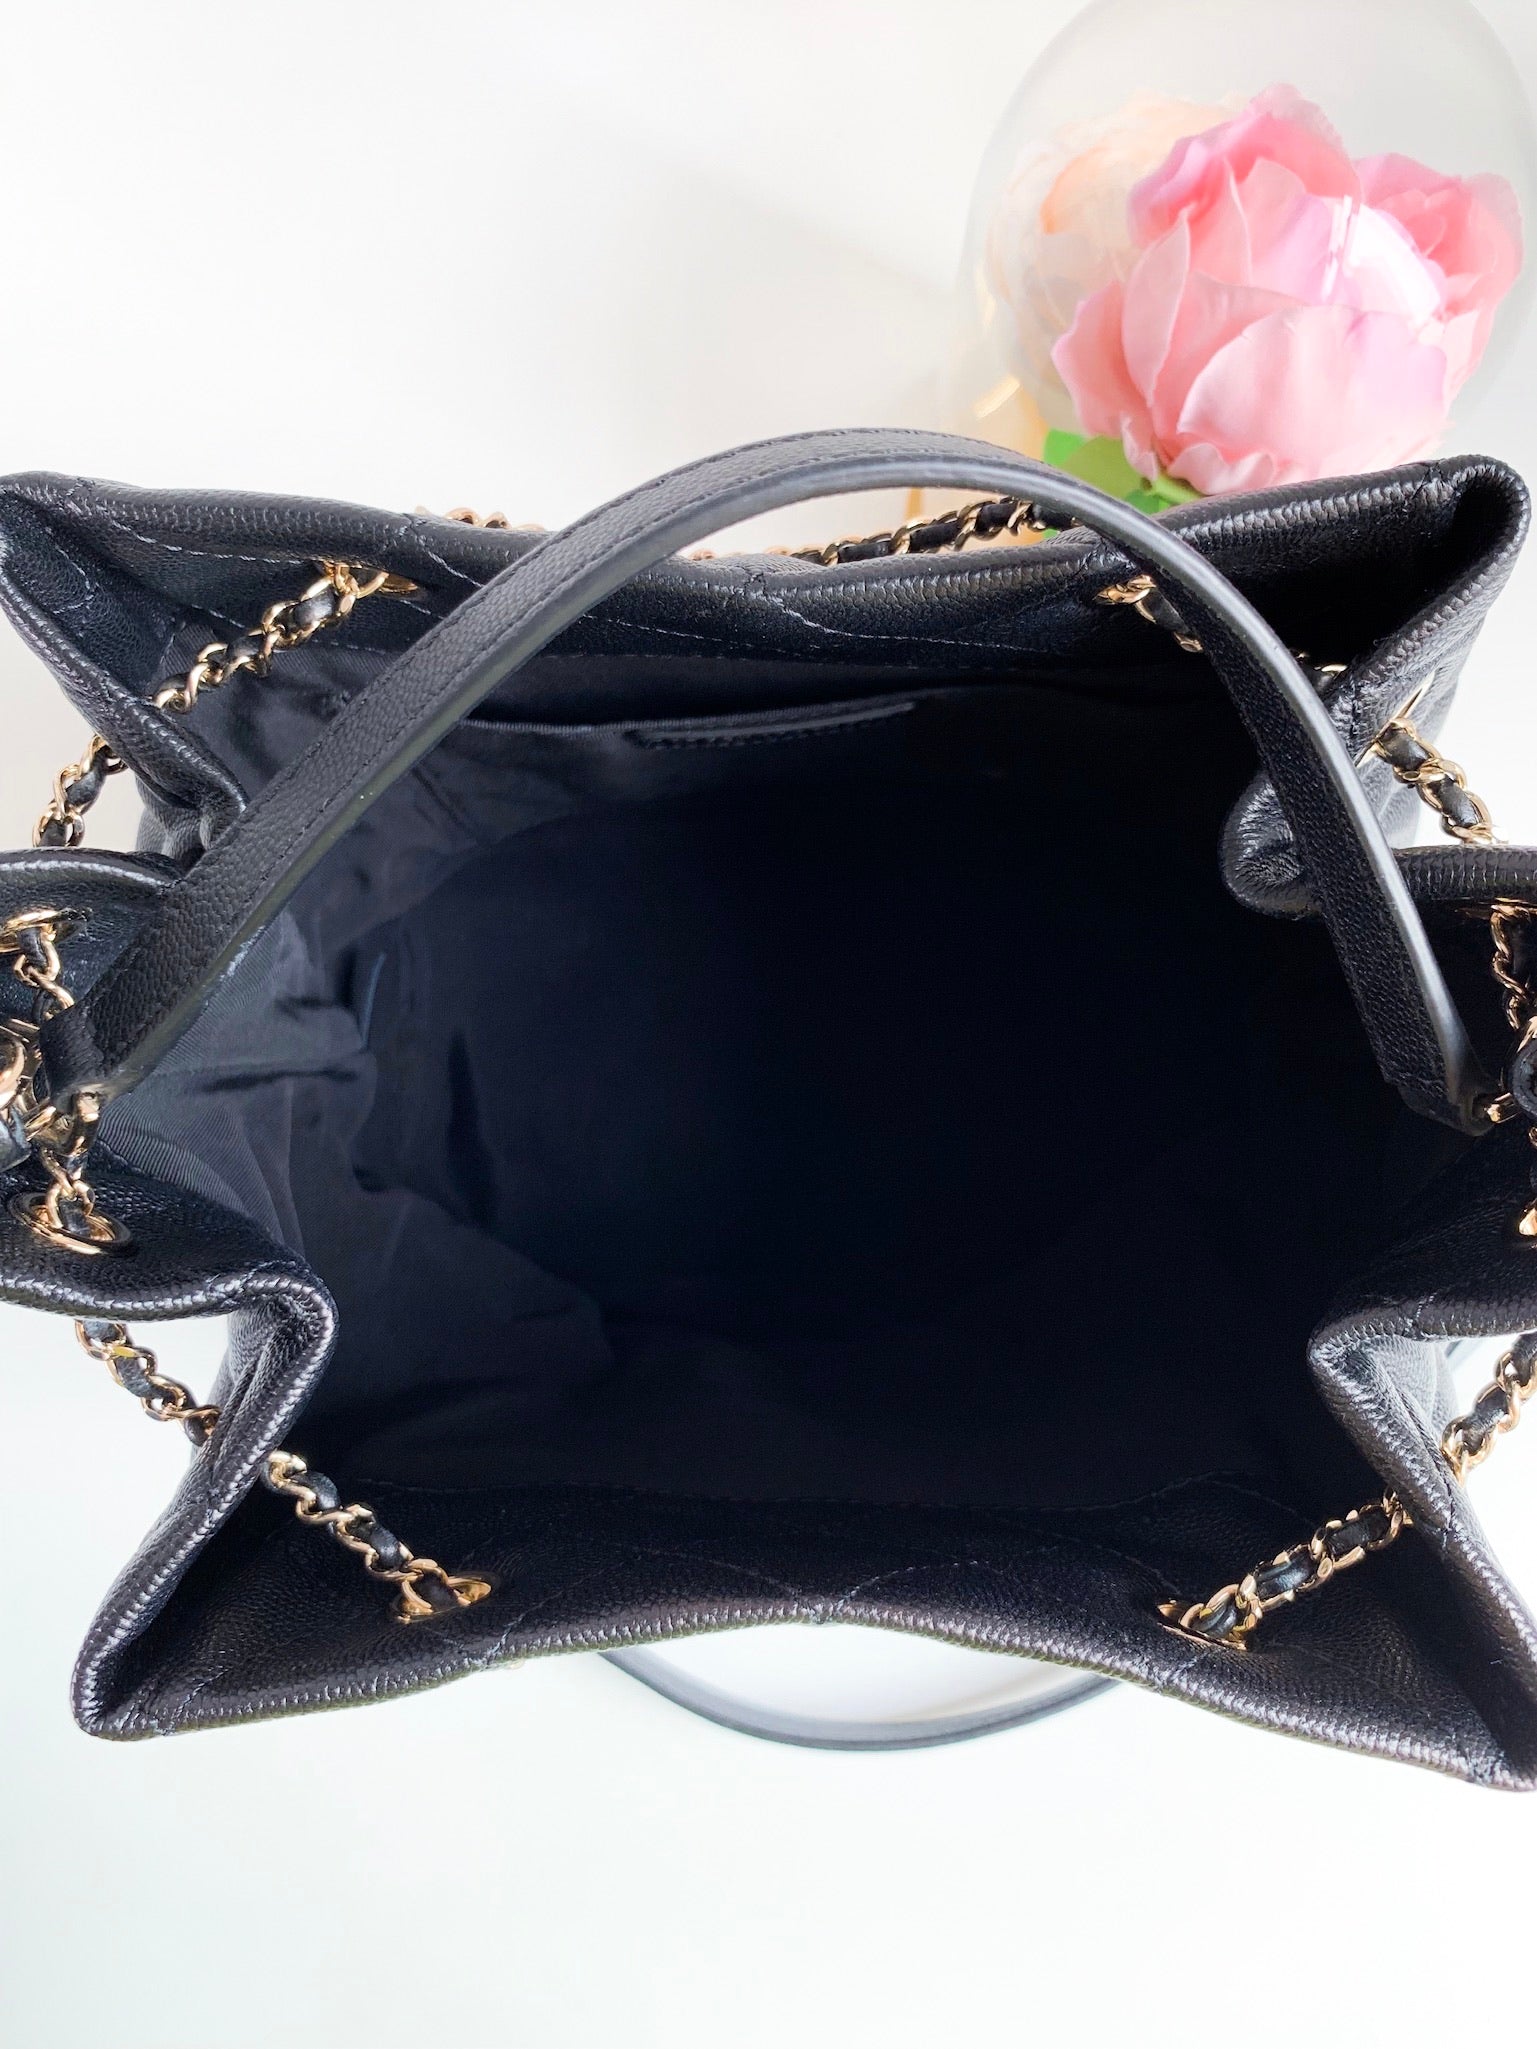 CHANEL Caviar Quilted Mini Bucket Bag Black 995580